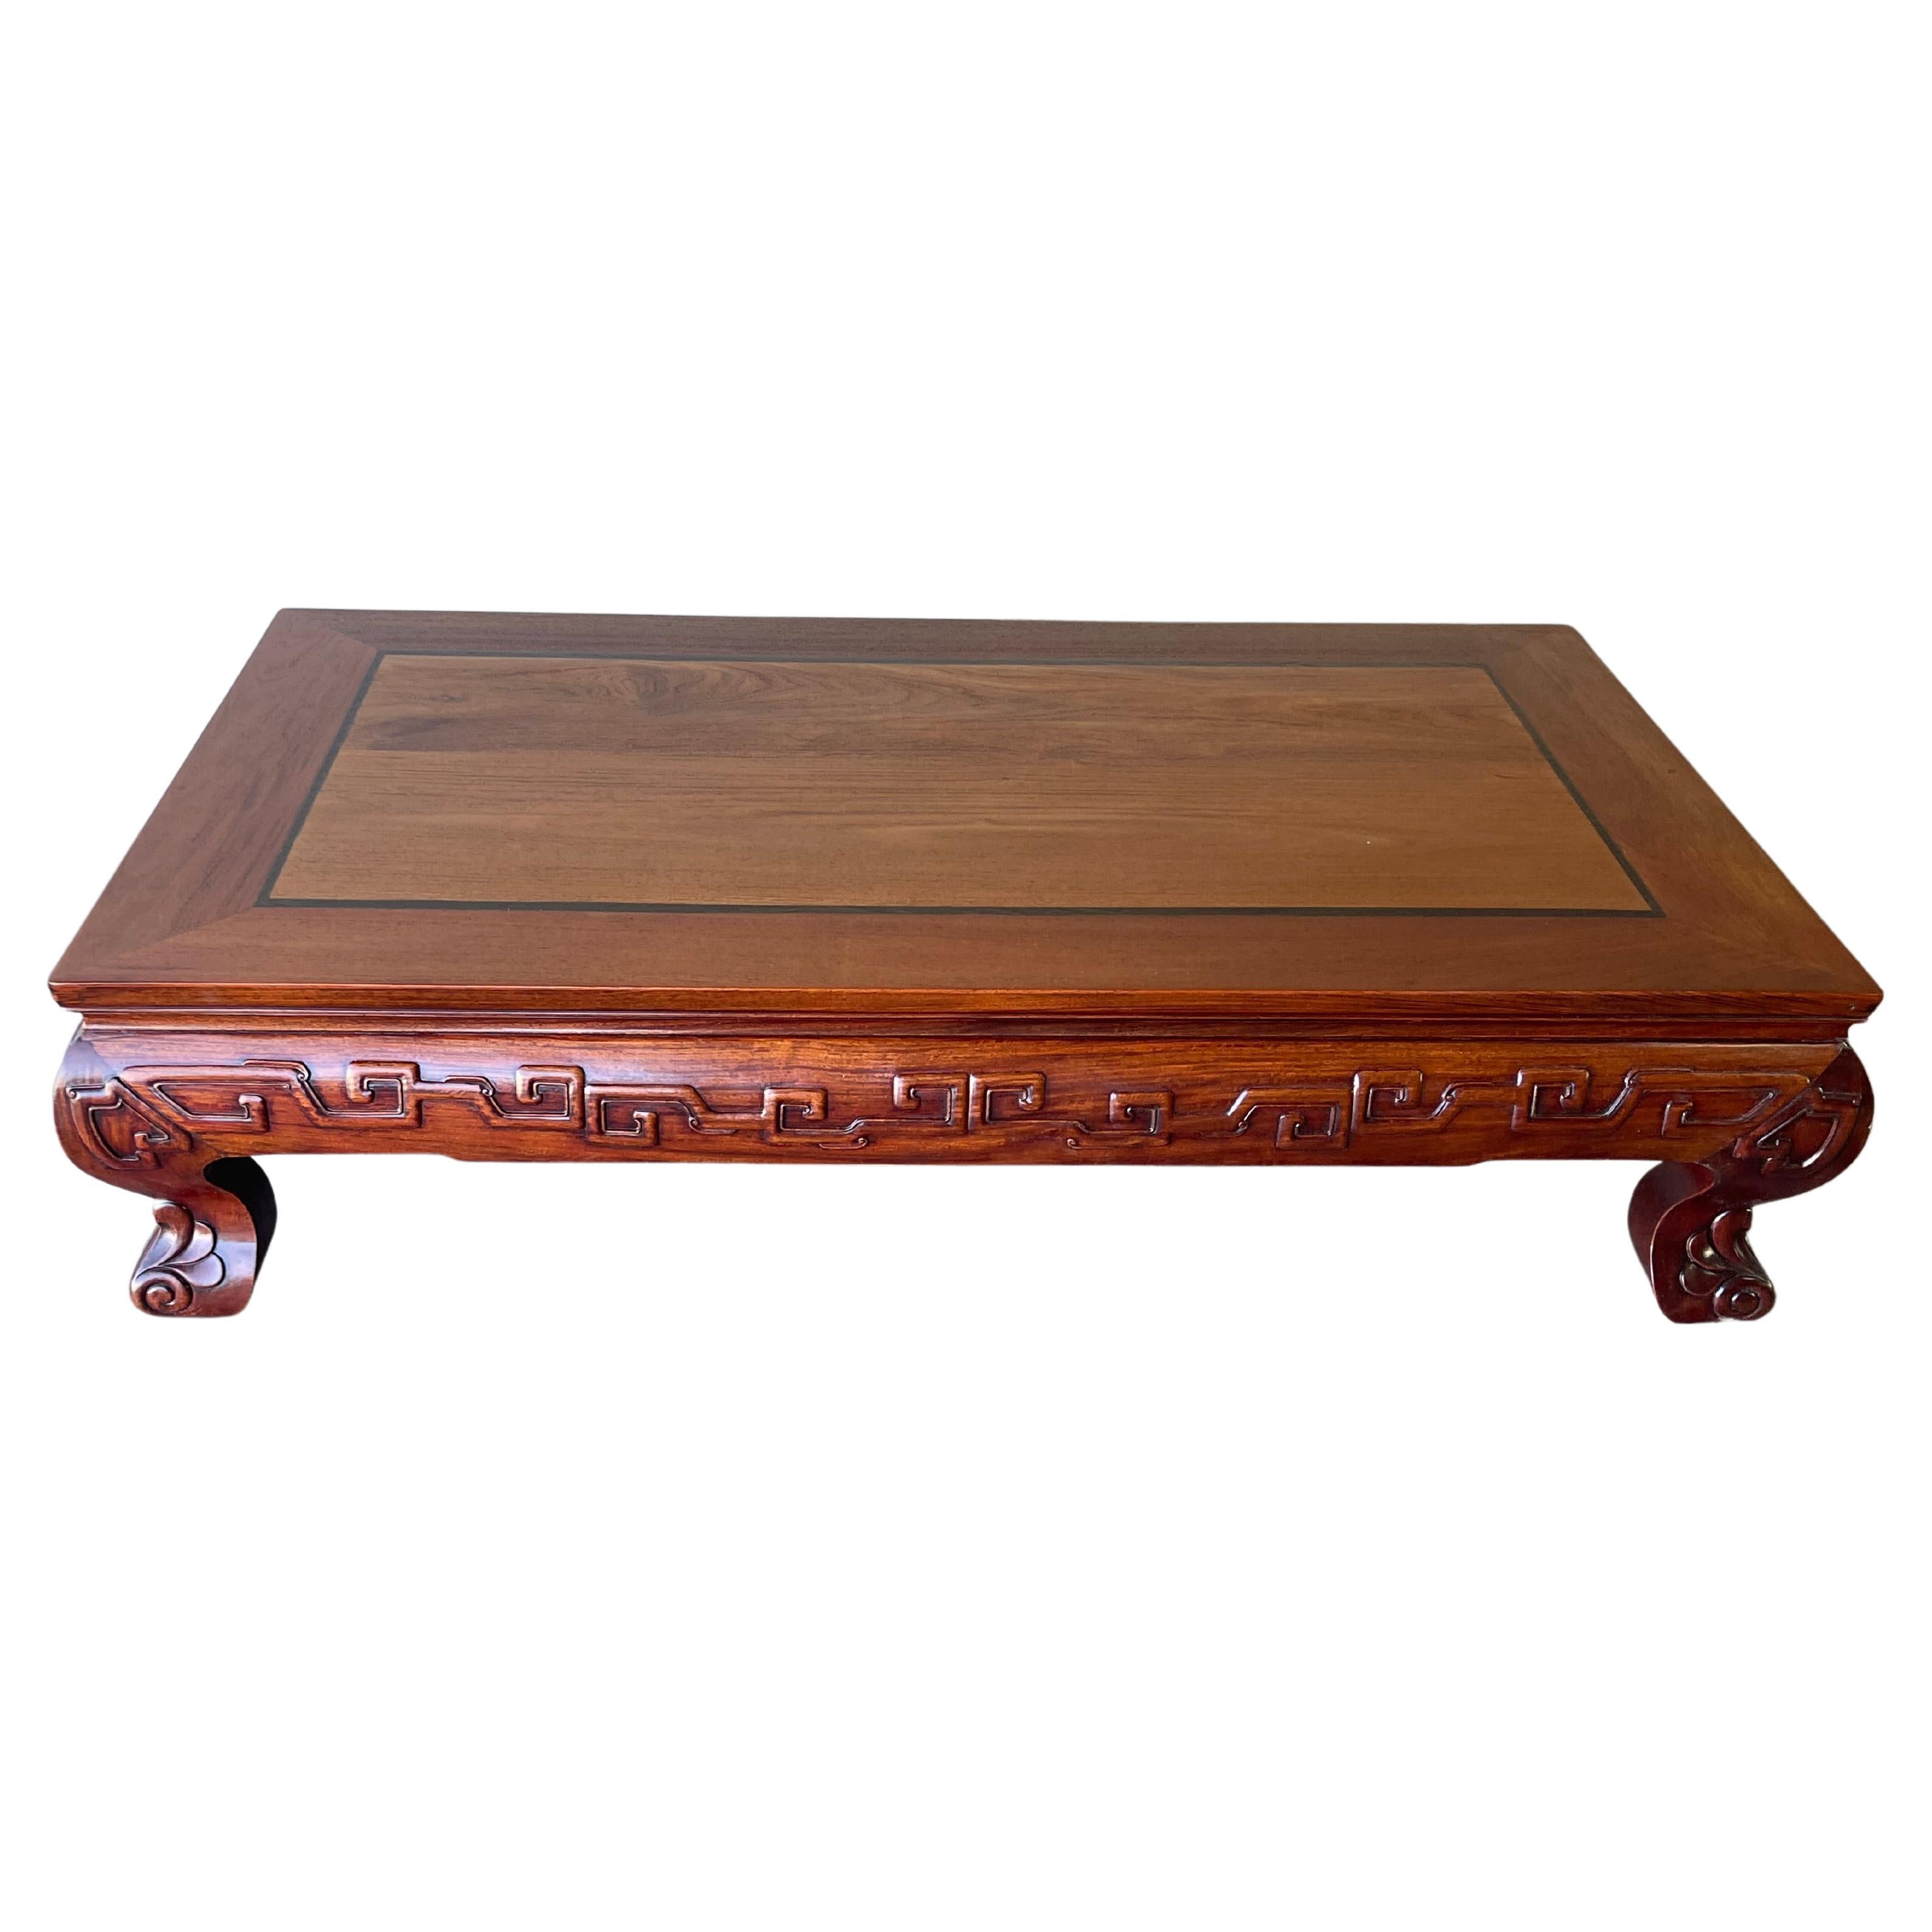 Anglo-Japanese 1900’s Japanese / Asian  Rosewood & Eboy Zataku Low / Coffee Table For Sale